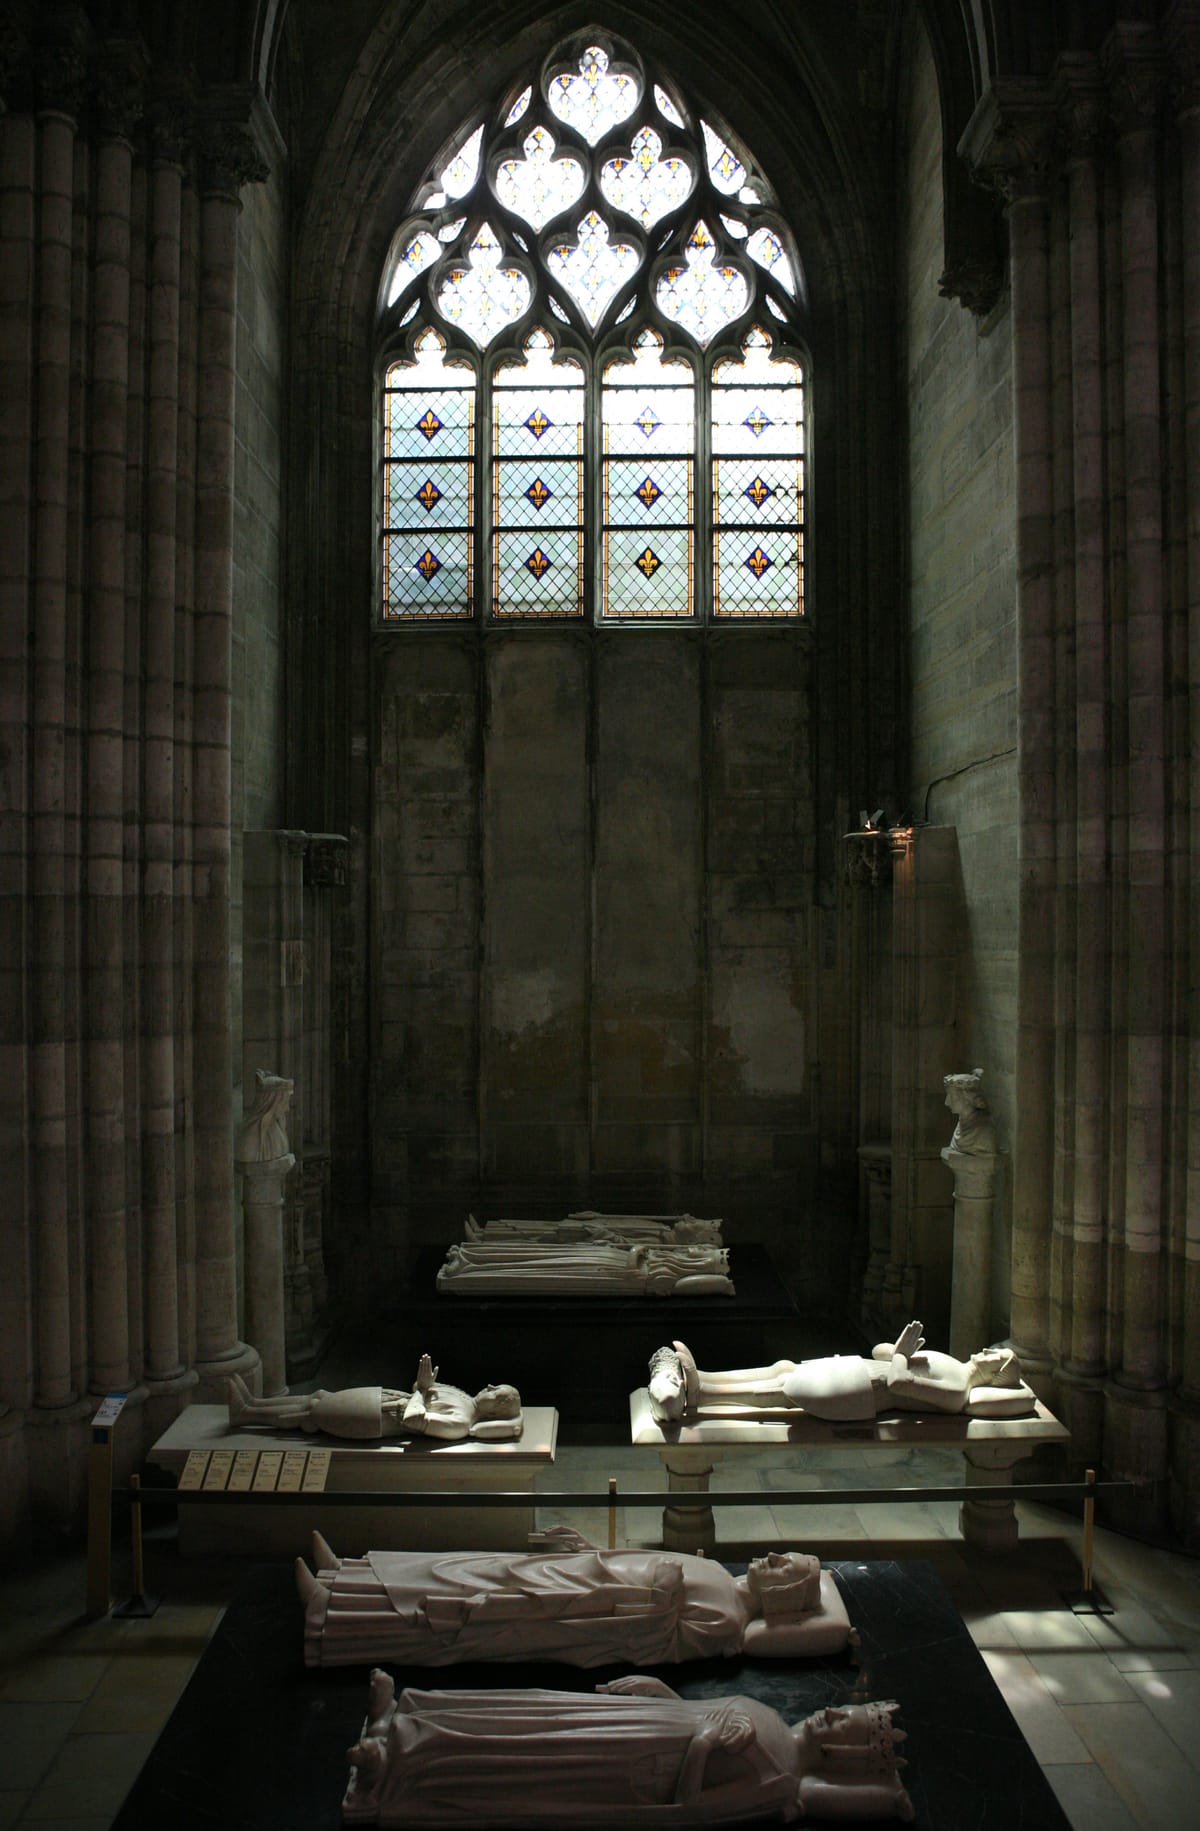 Saint-Denis Basilica - (From left to right clockwise) Tombs of Bertrand Du Guesclin, Charles VI, Isabeau of Bavaria, Louis de Sancerre, Charles V the Wise, Jeanne de Bourbon (2010) - Catholic Stock Photo